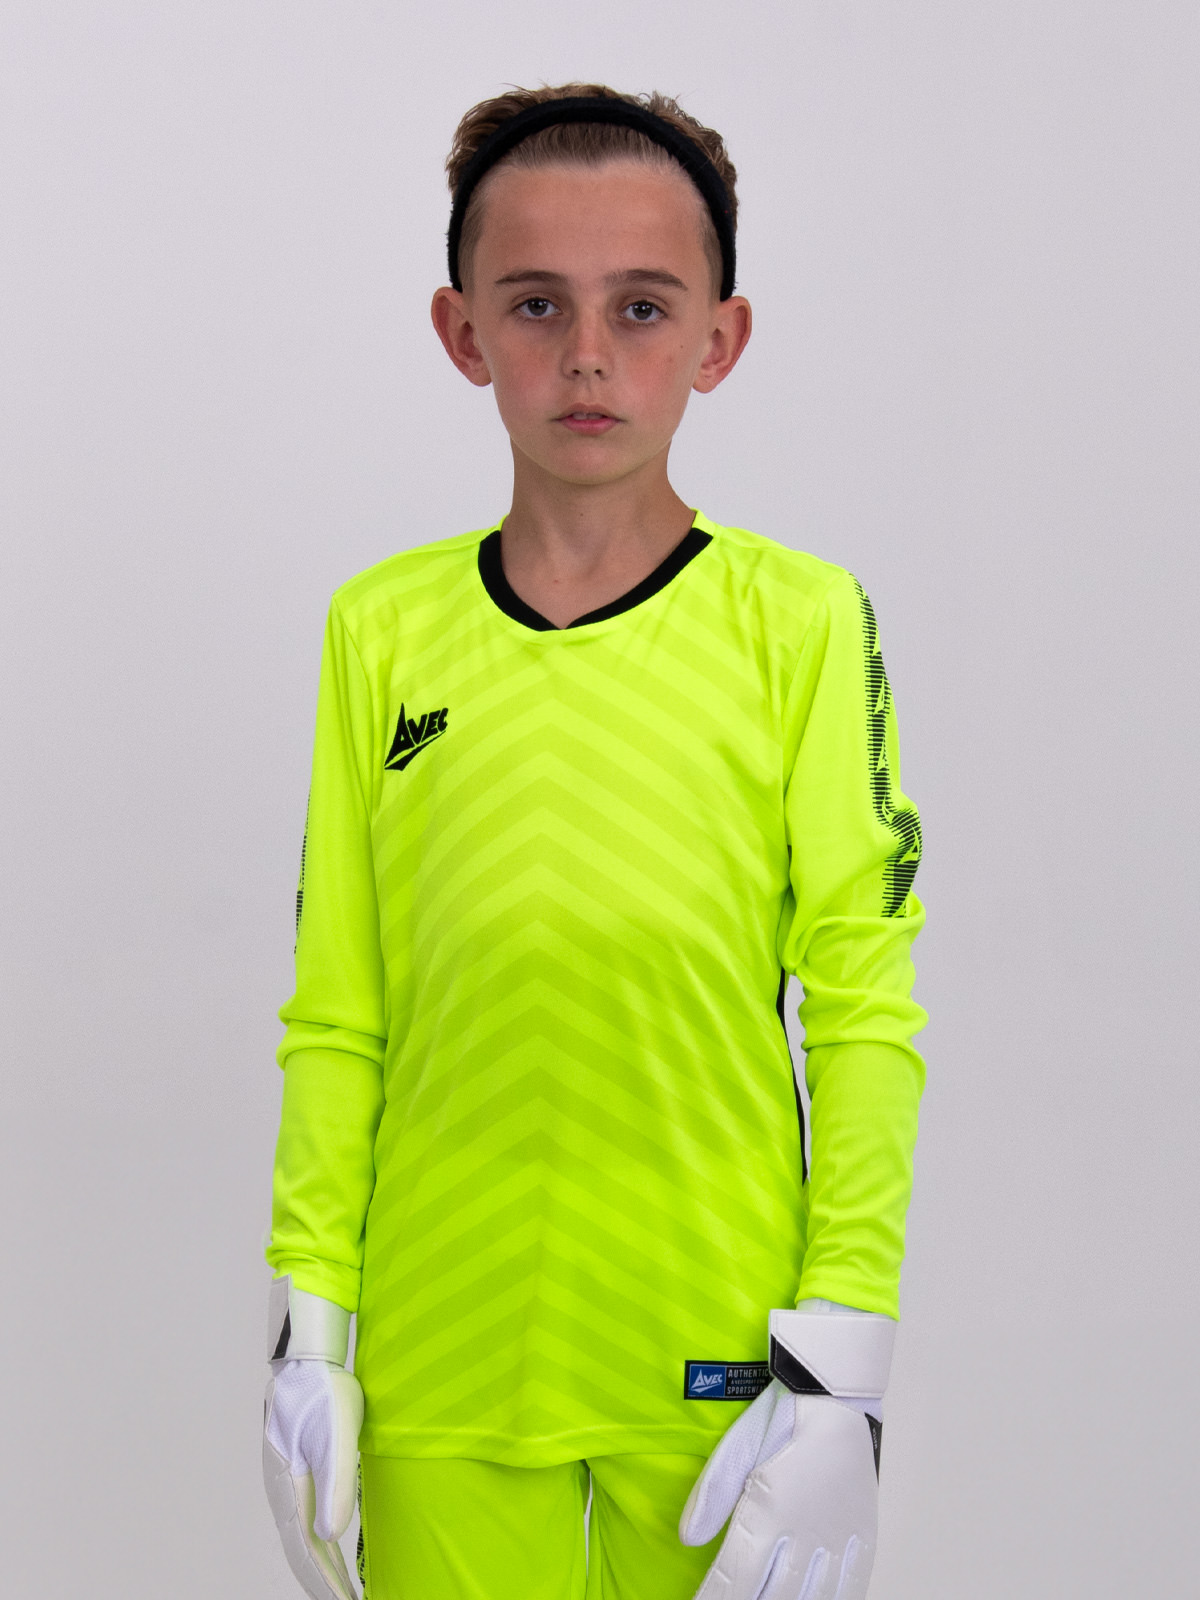 this child is wearing a neon yellow goalkeeper shirt, which has a graphic print on the front.